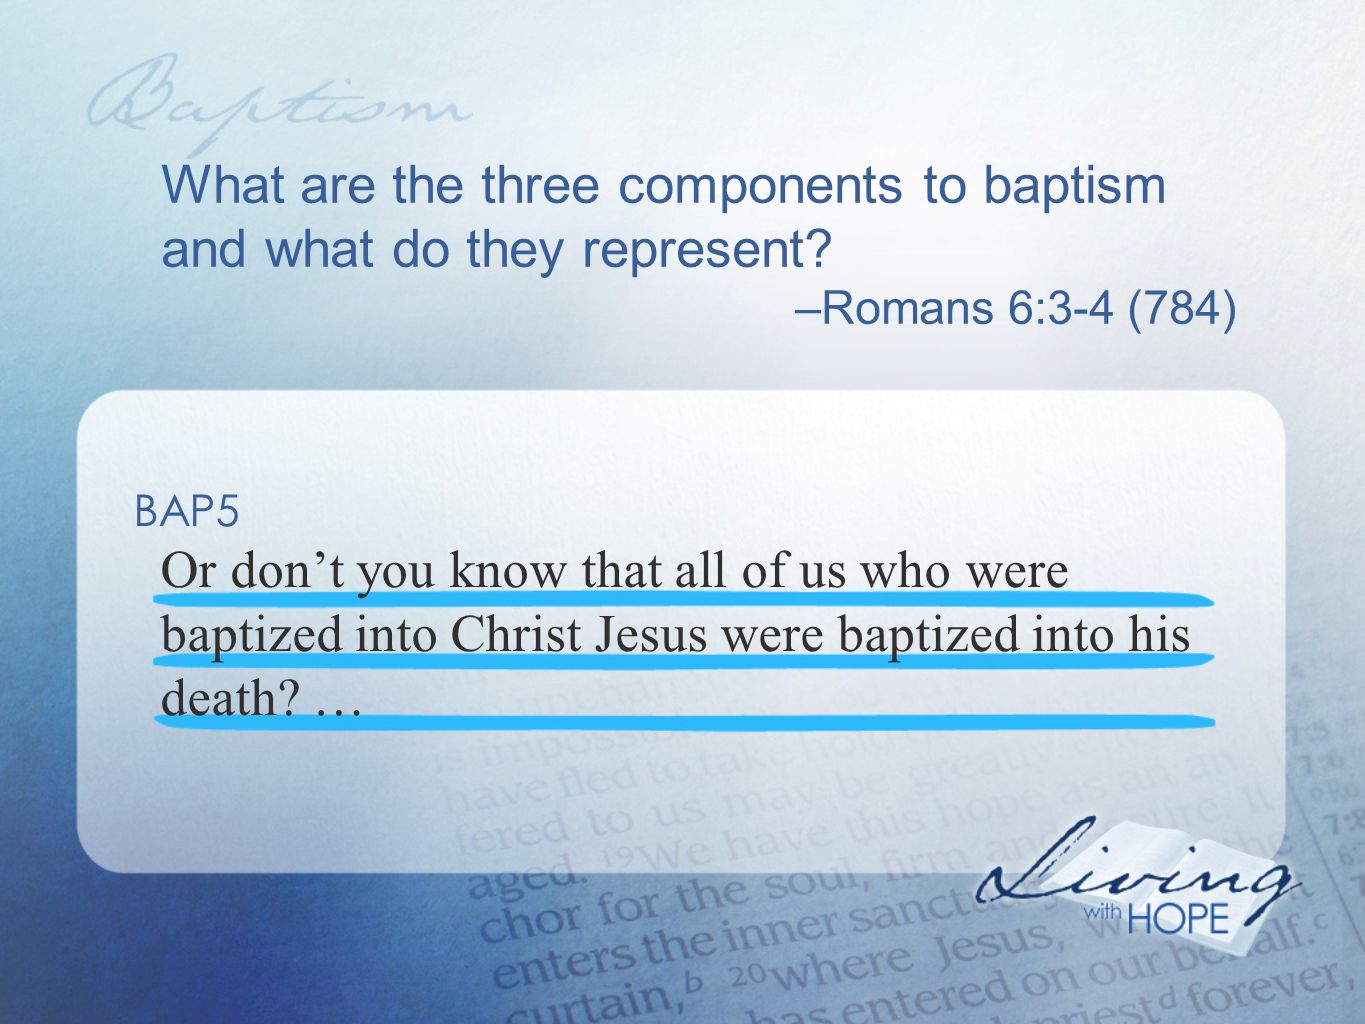 What are the three components to baptism and what do they represent.